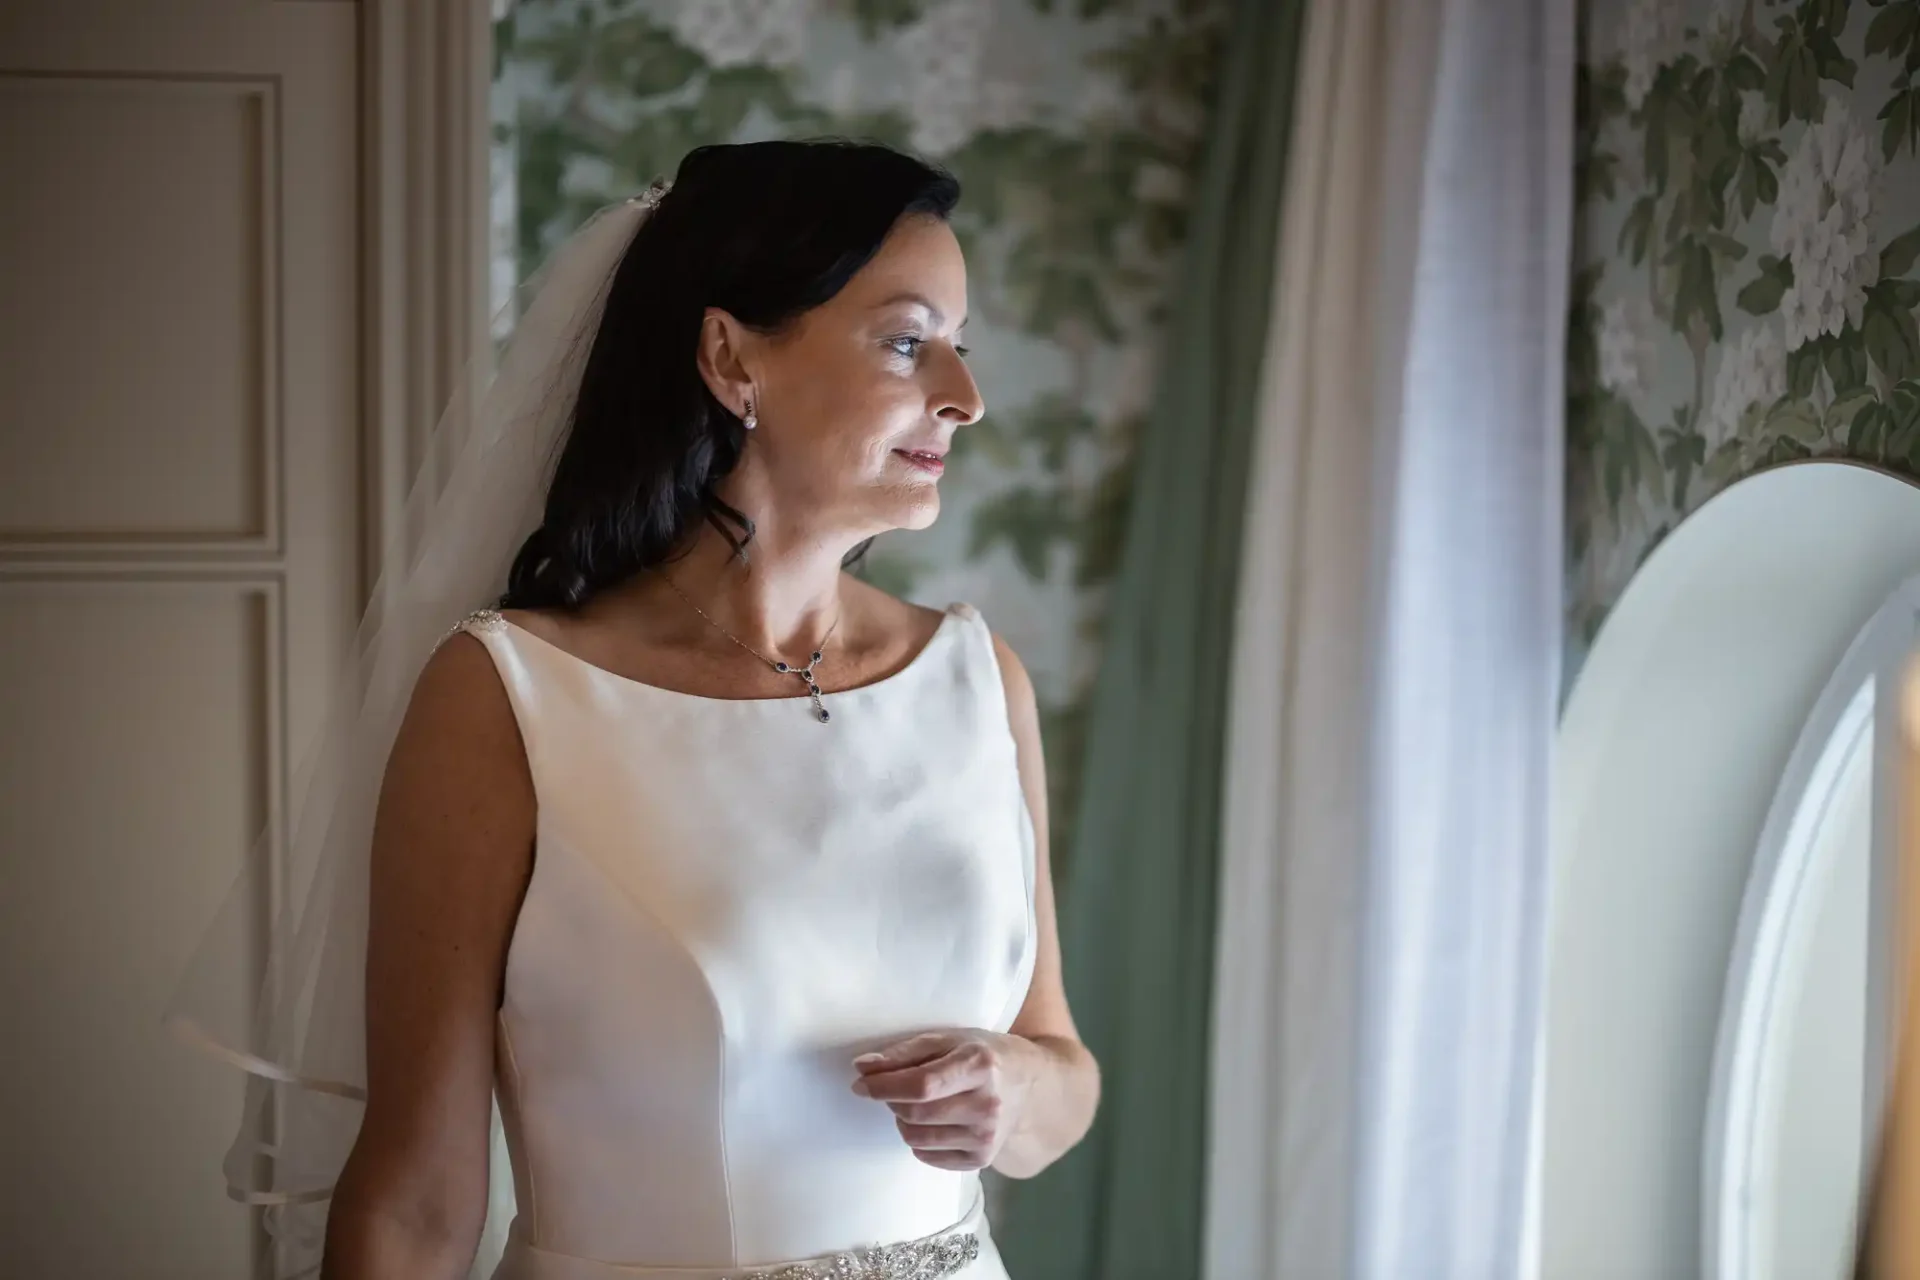 A mature bride in a white dress and veil looks at a mirror, her expression thoughtful and serene.